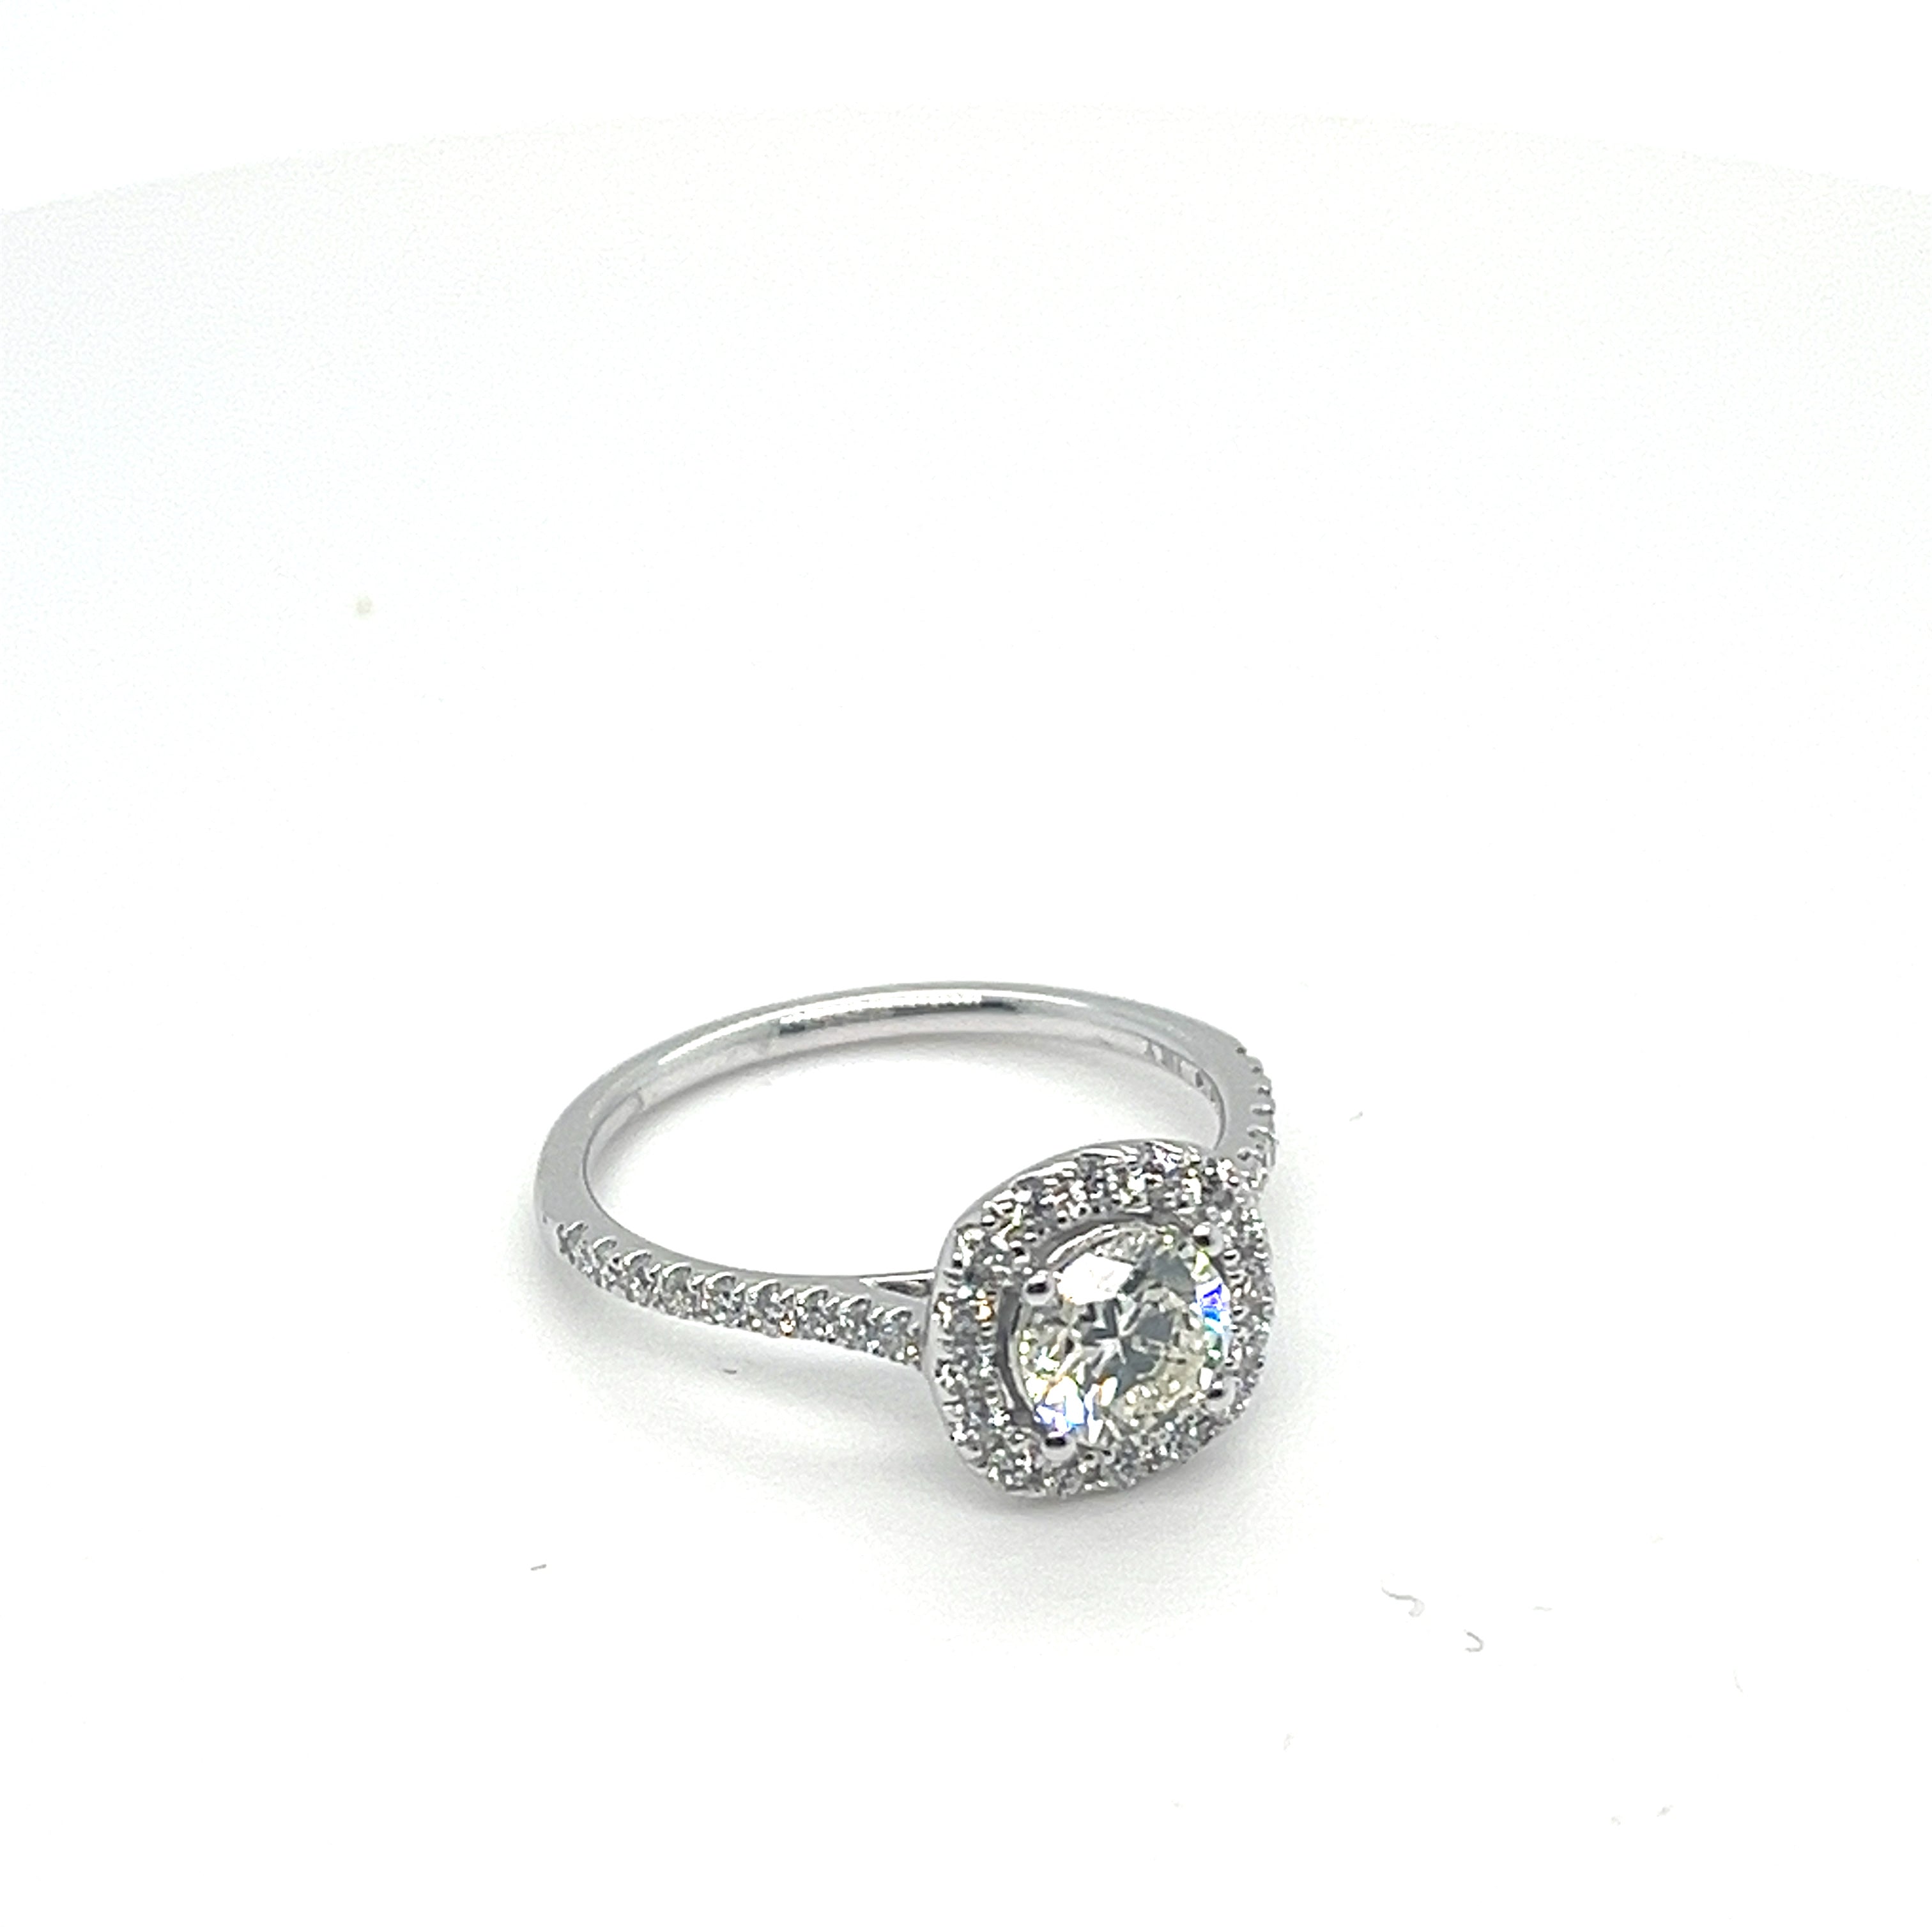 0.74 CT BR H SI1 NCT /14KWG BR 0.30CT DIA CUSHION HALO ENG RING